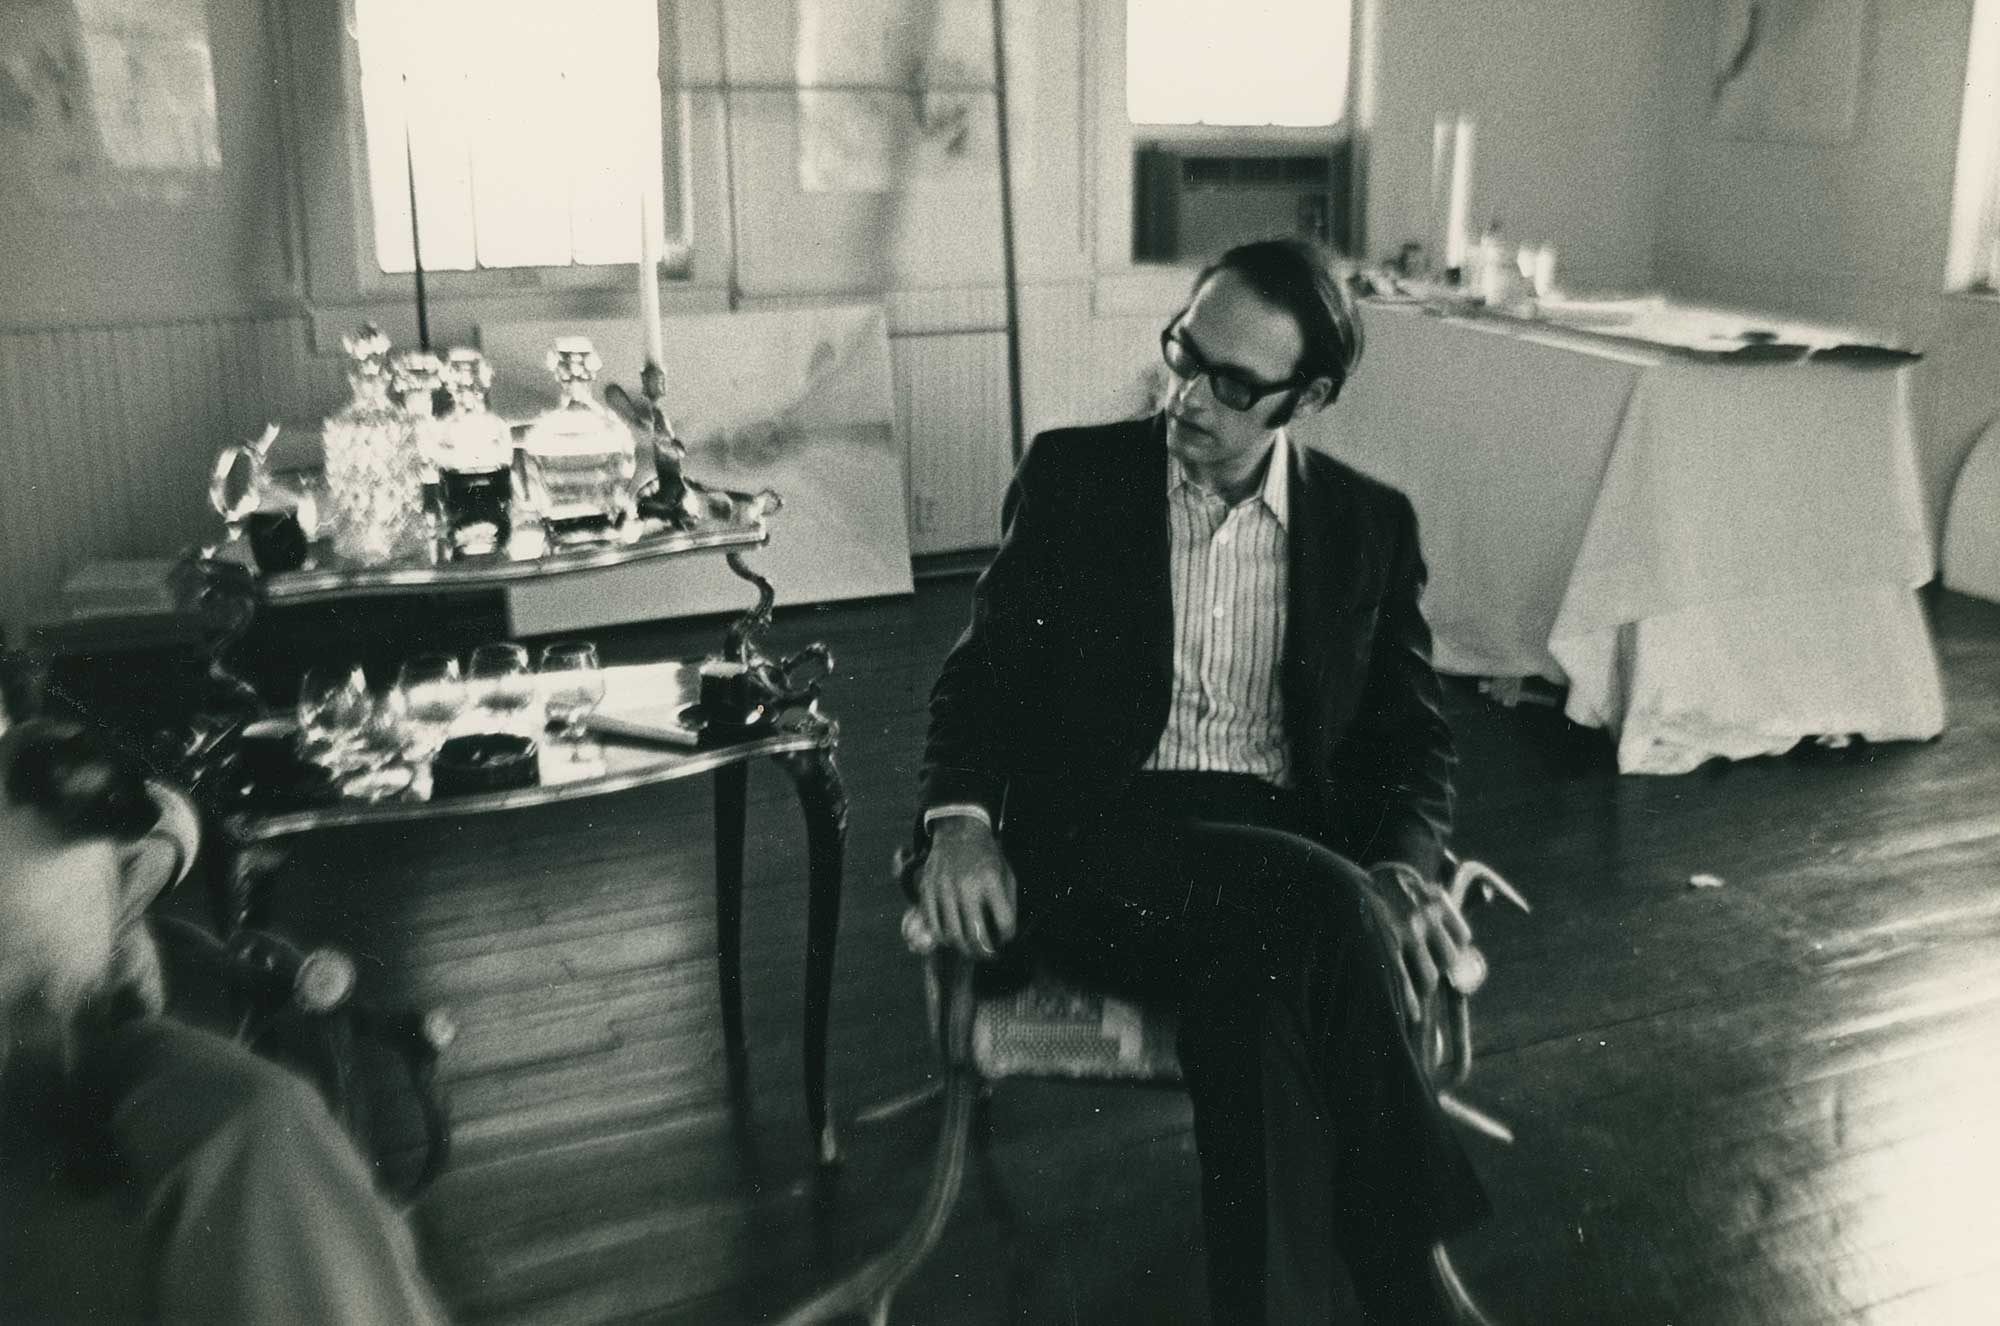 Jerry Hunt seated in Salle Werner's studio.